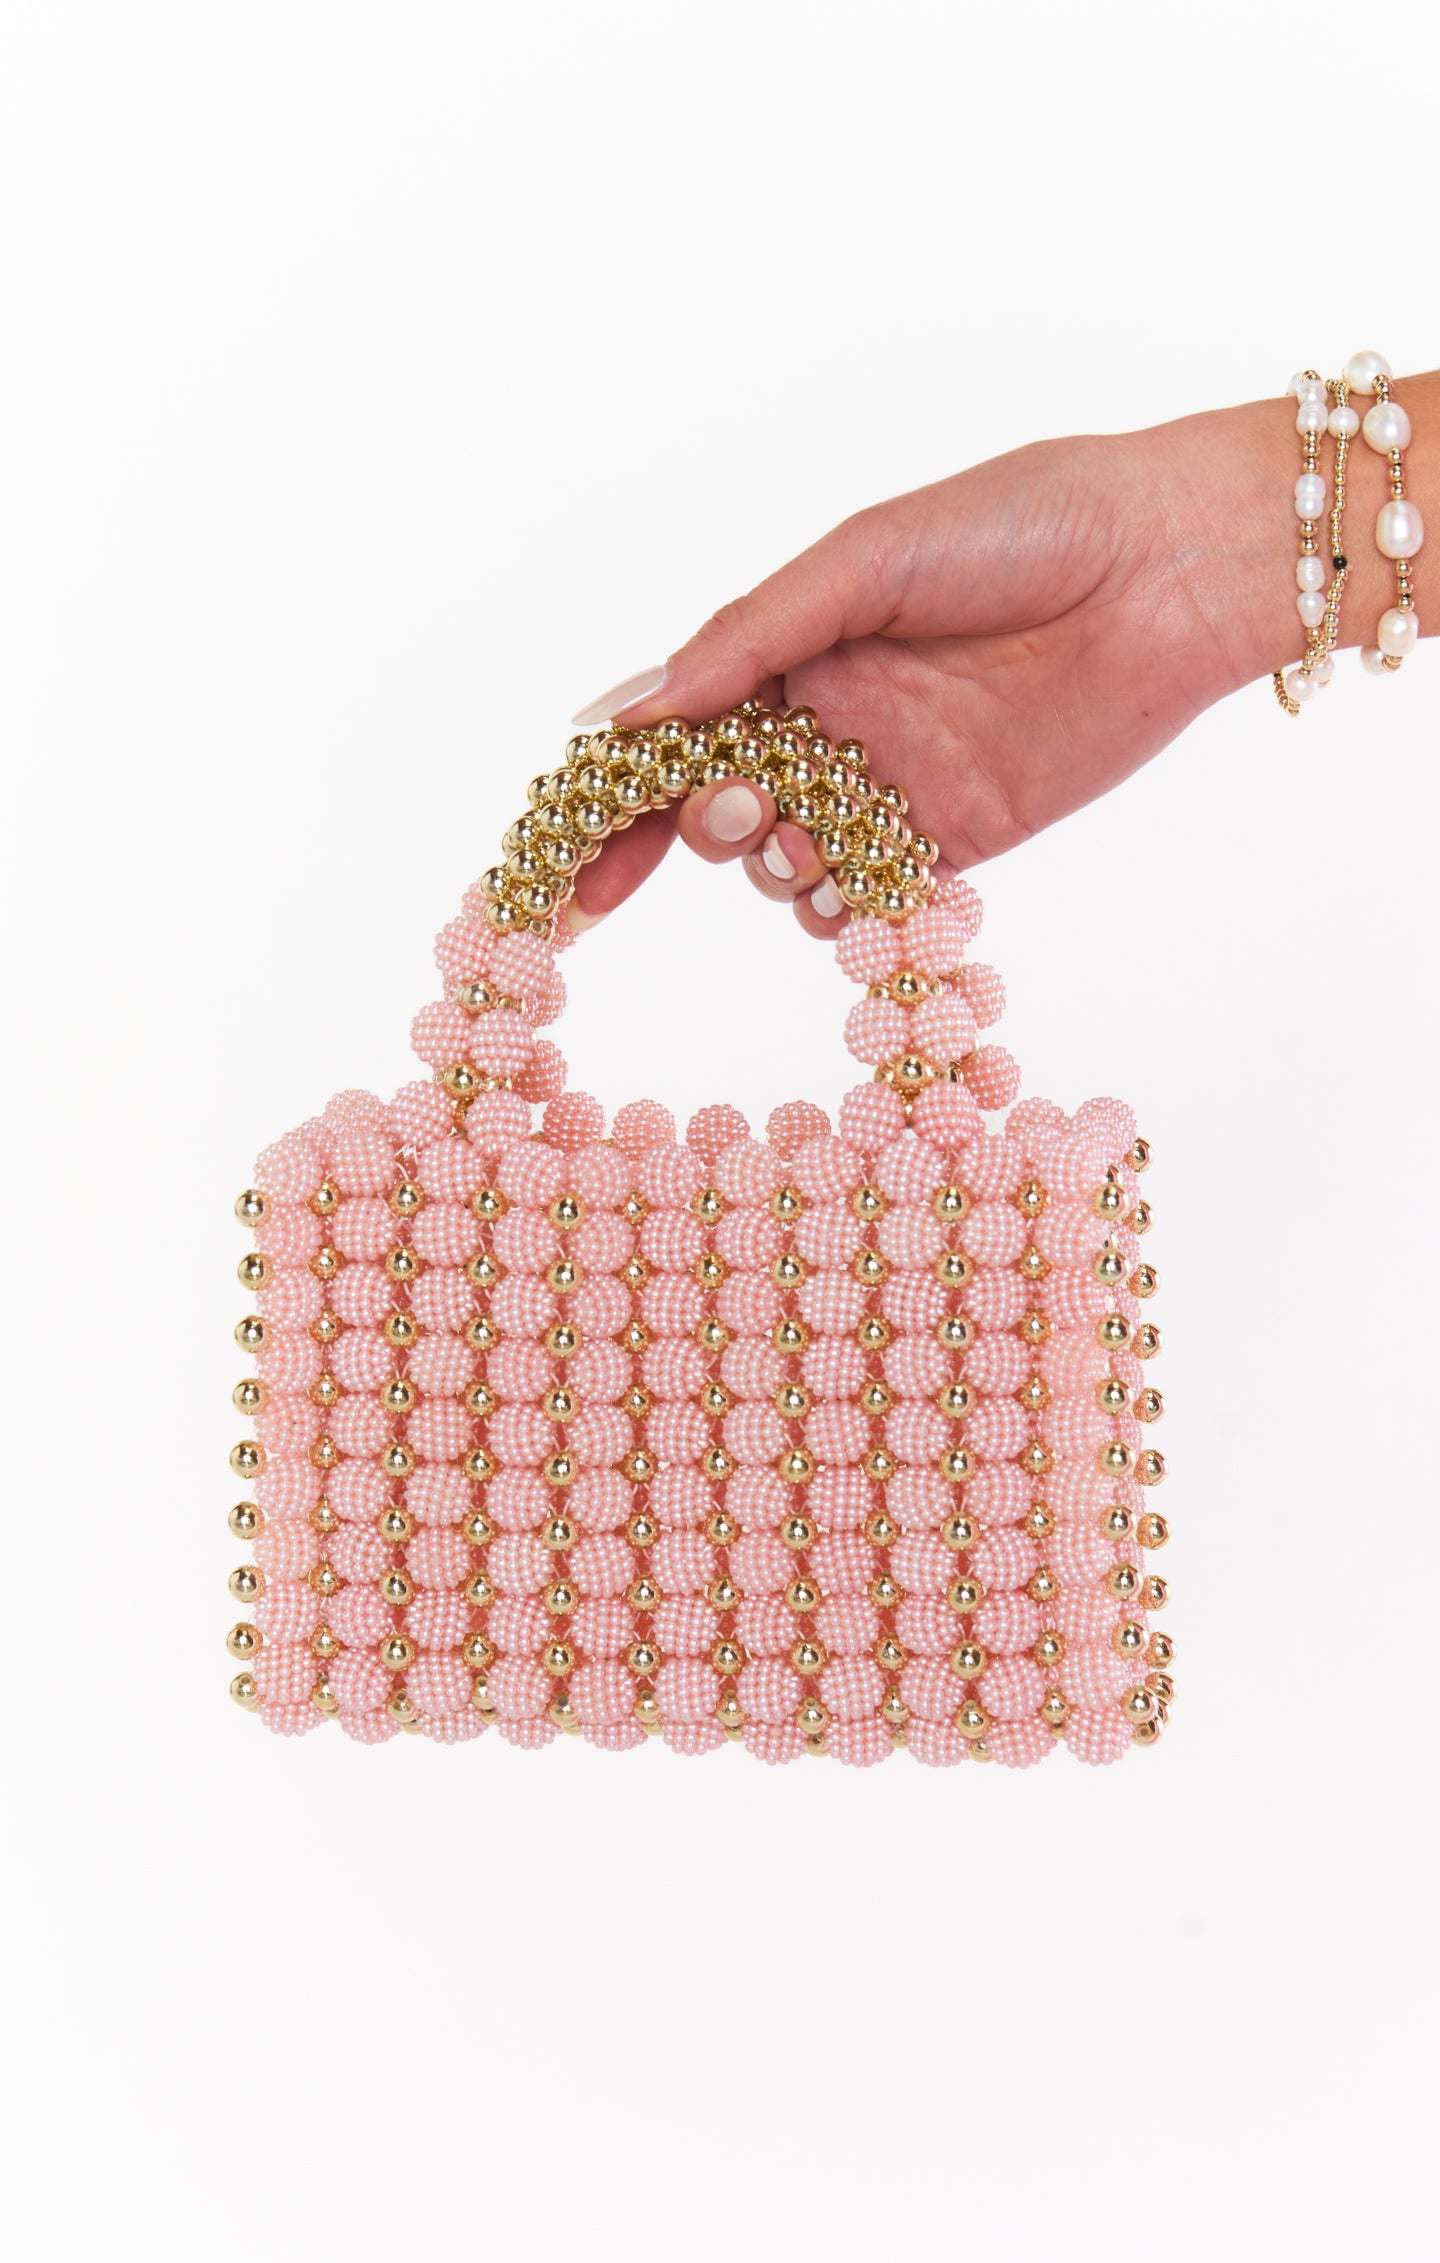 Gold Clutch and Accessiories fashion girly pink pretty gold lace pearls  clutch accessories purse evening bag